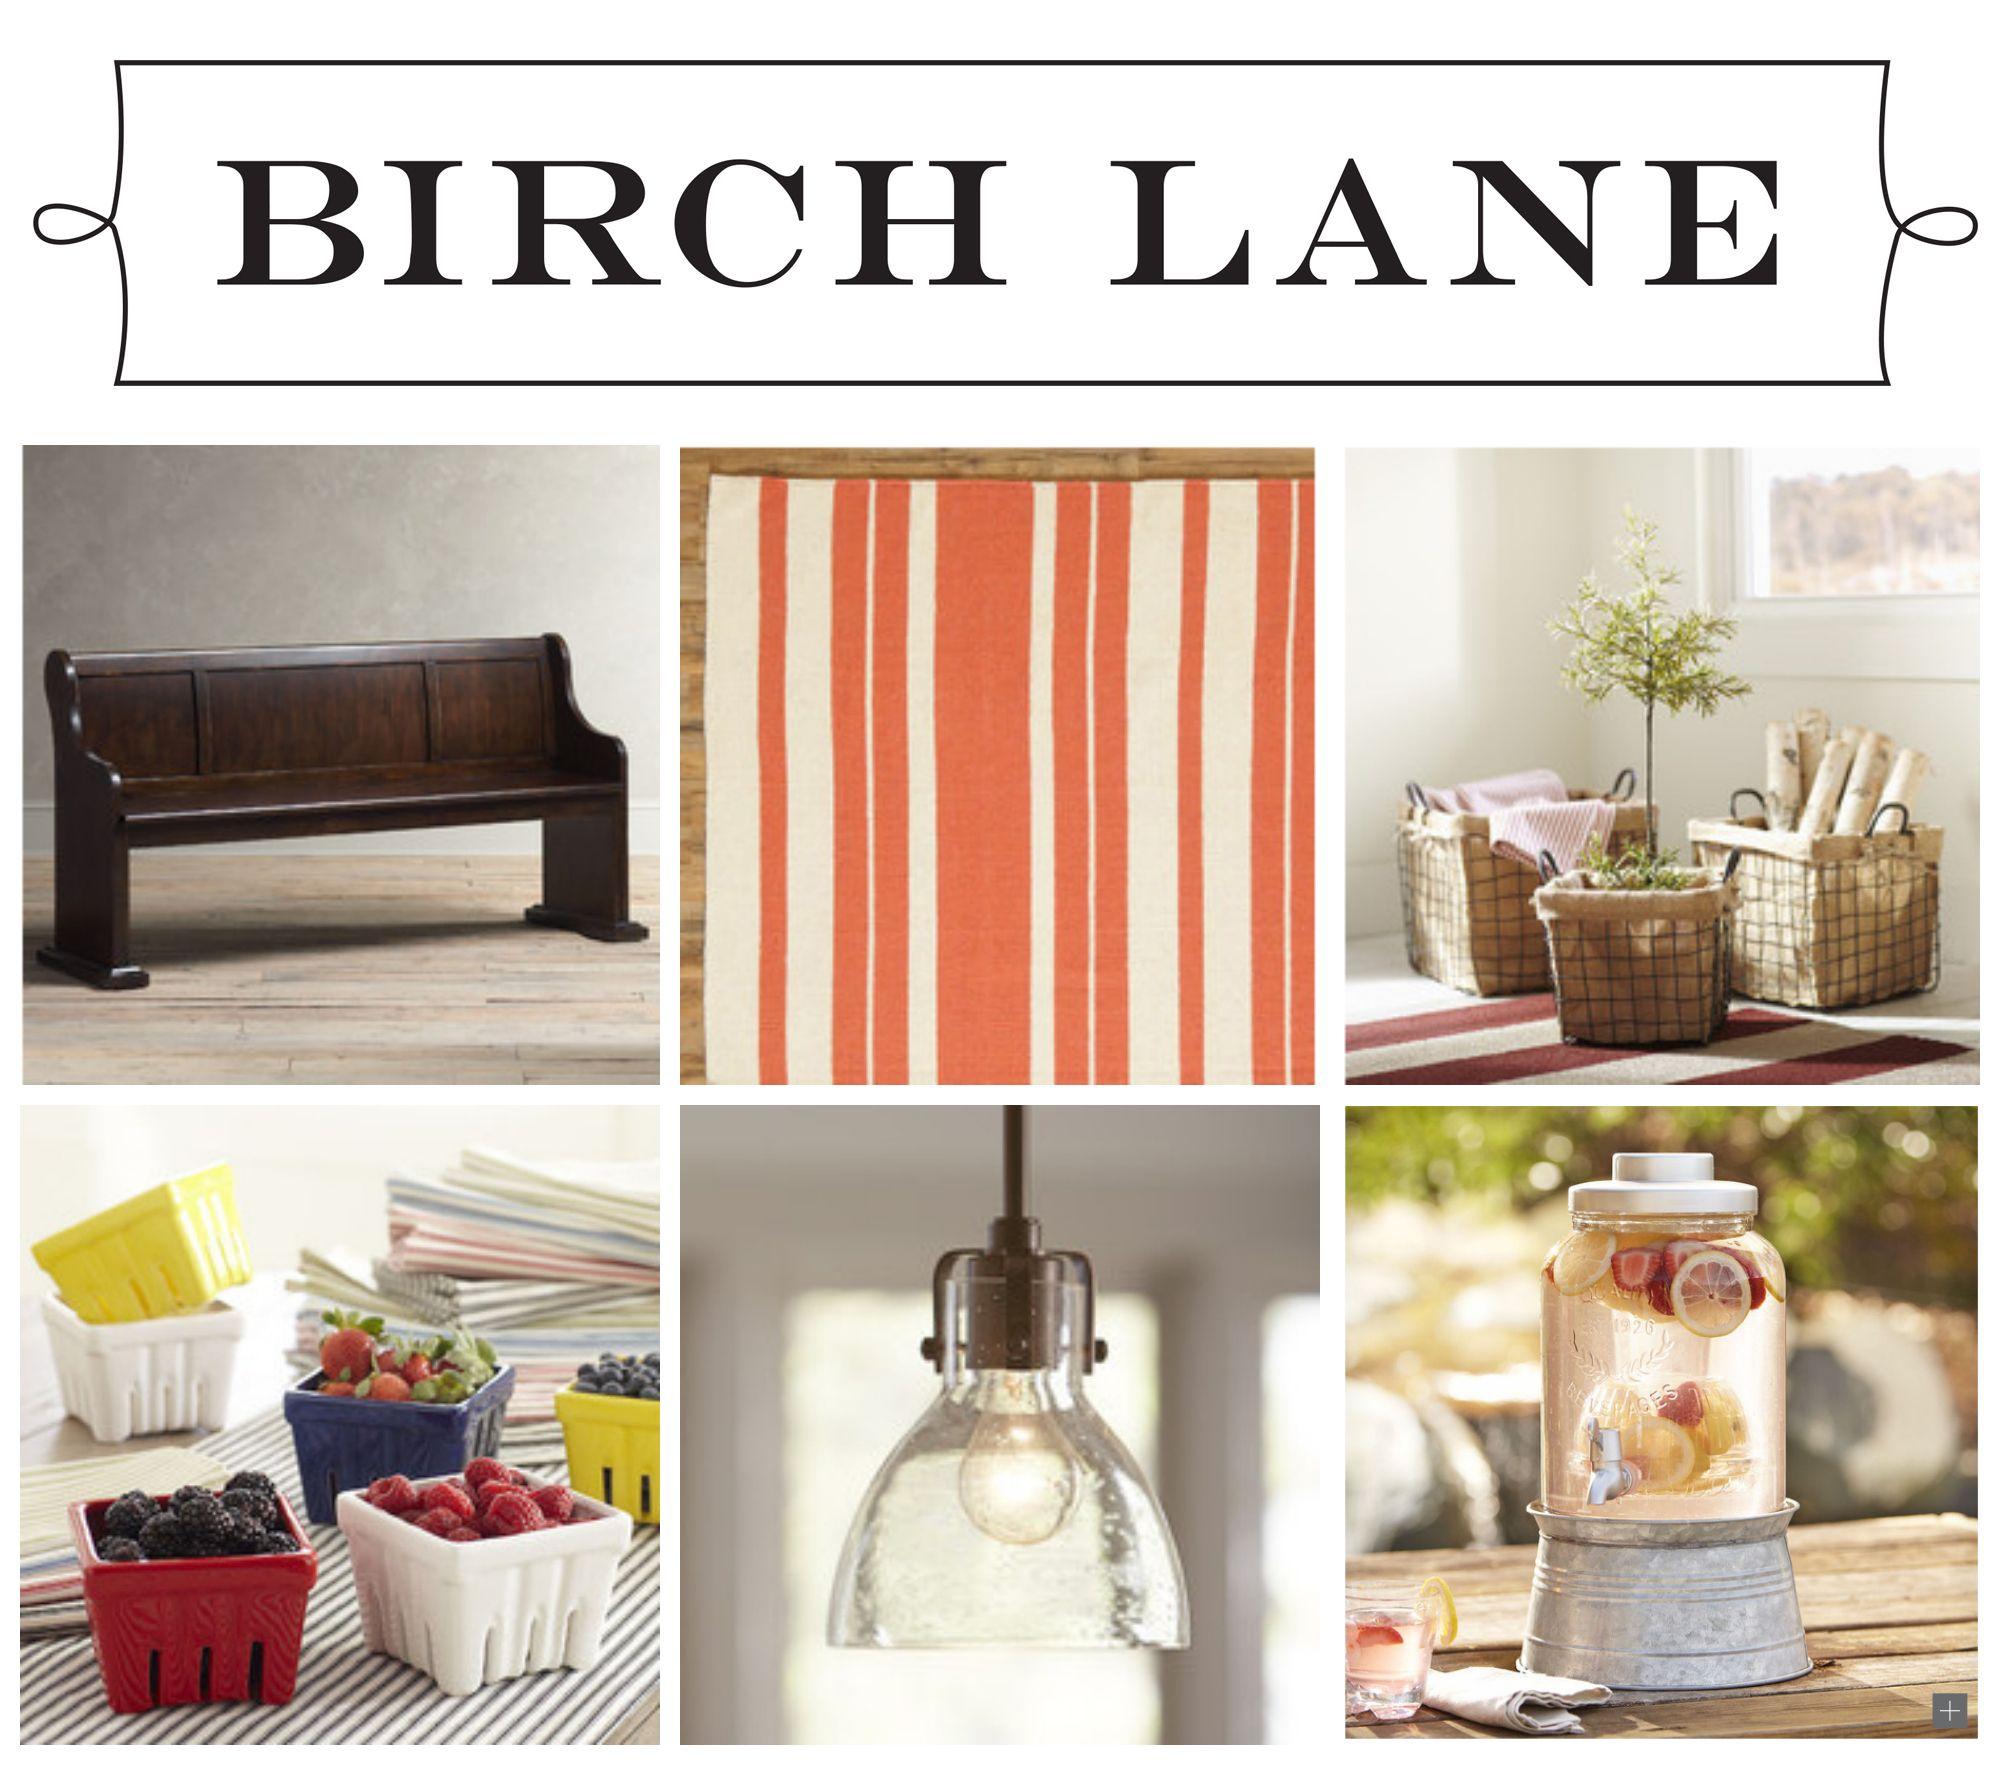 Birch Lane Logo - The Story of My Mismatched Chairs